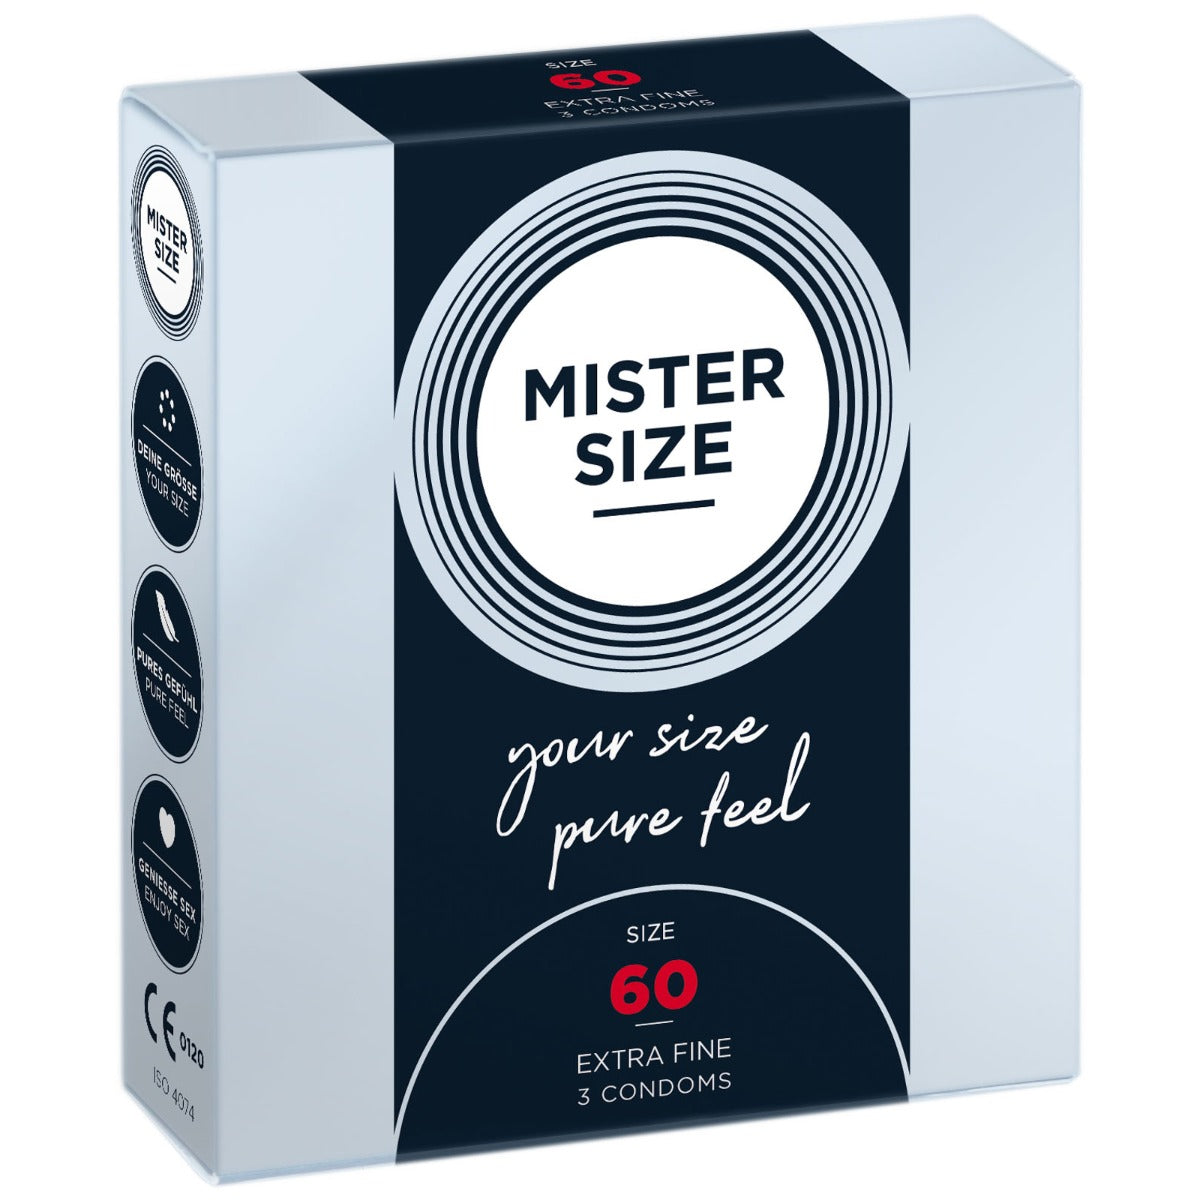 Condoms MISTER SIZE - pure feel Condoms - Size 60 mm (3 pack)   